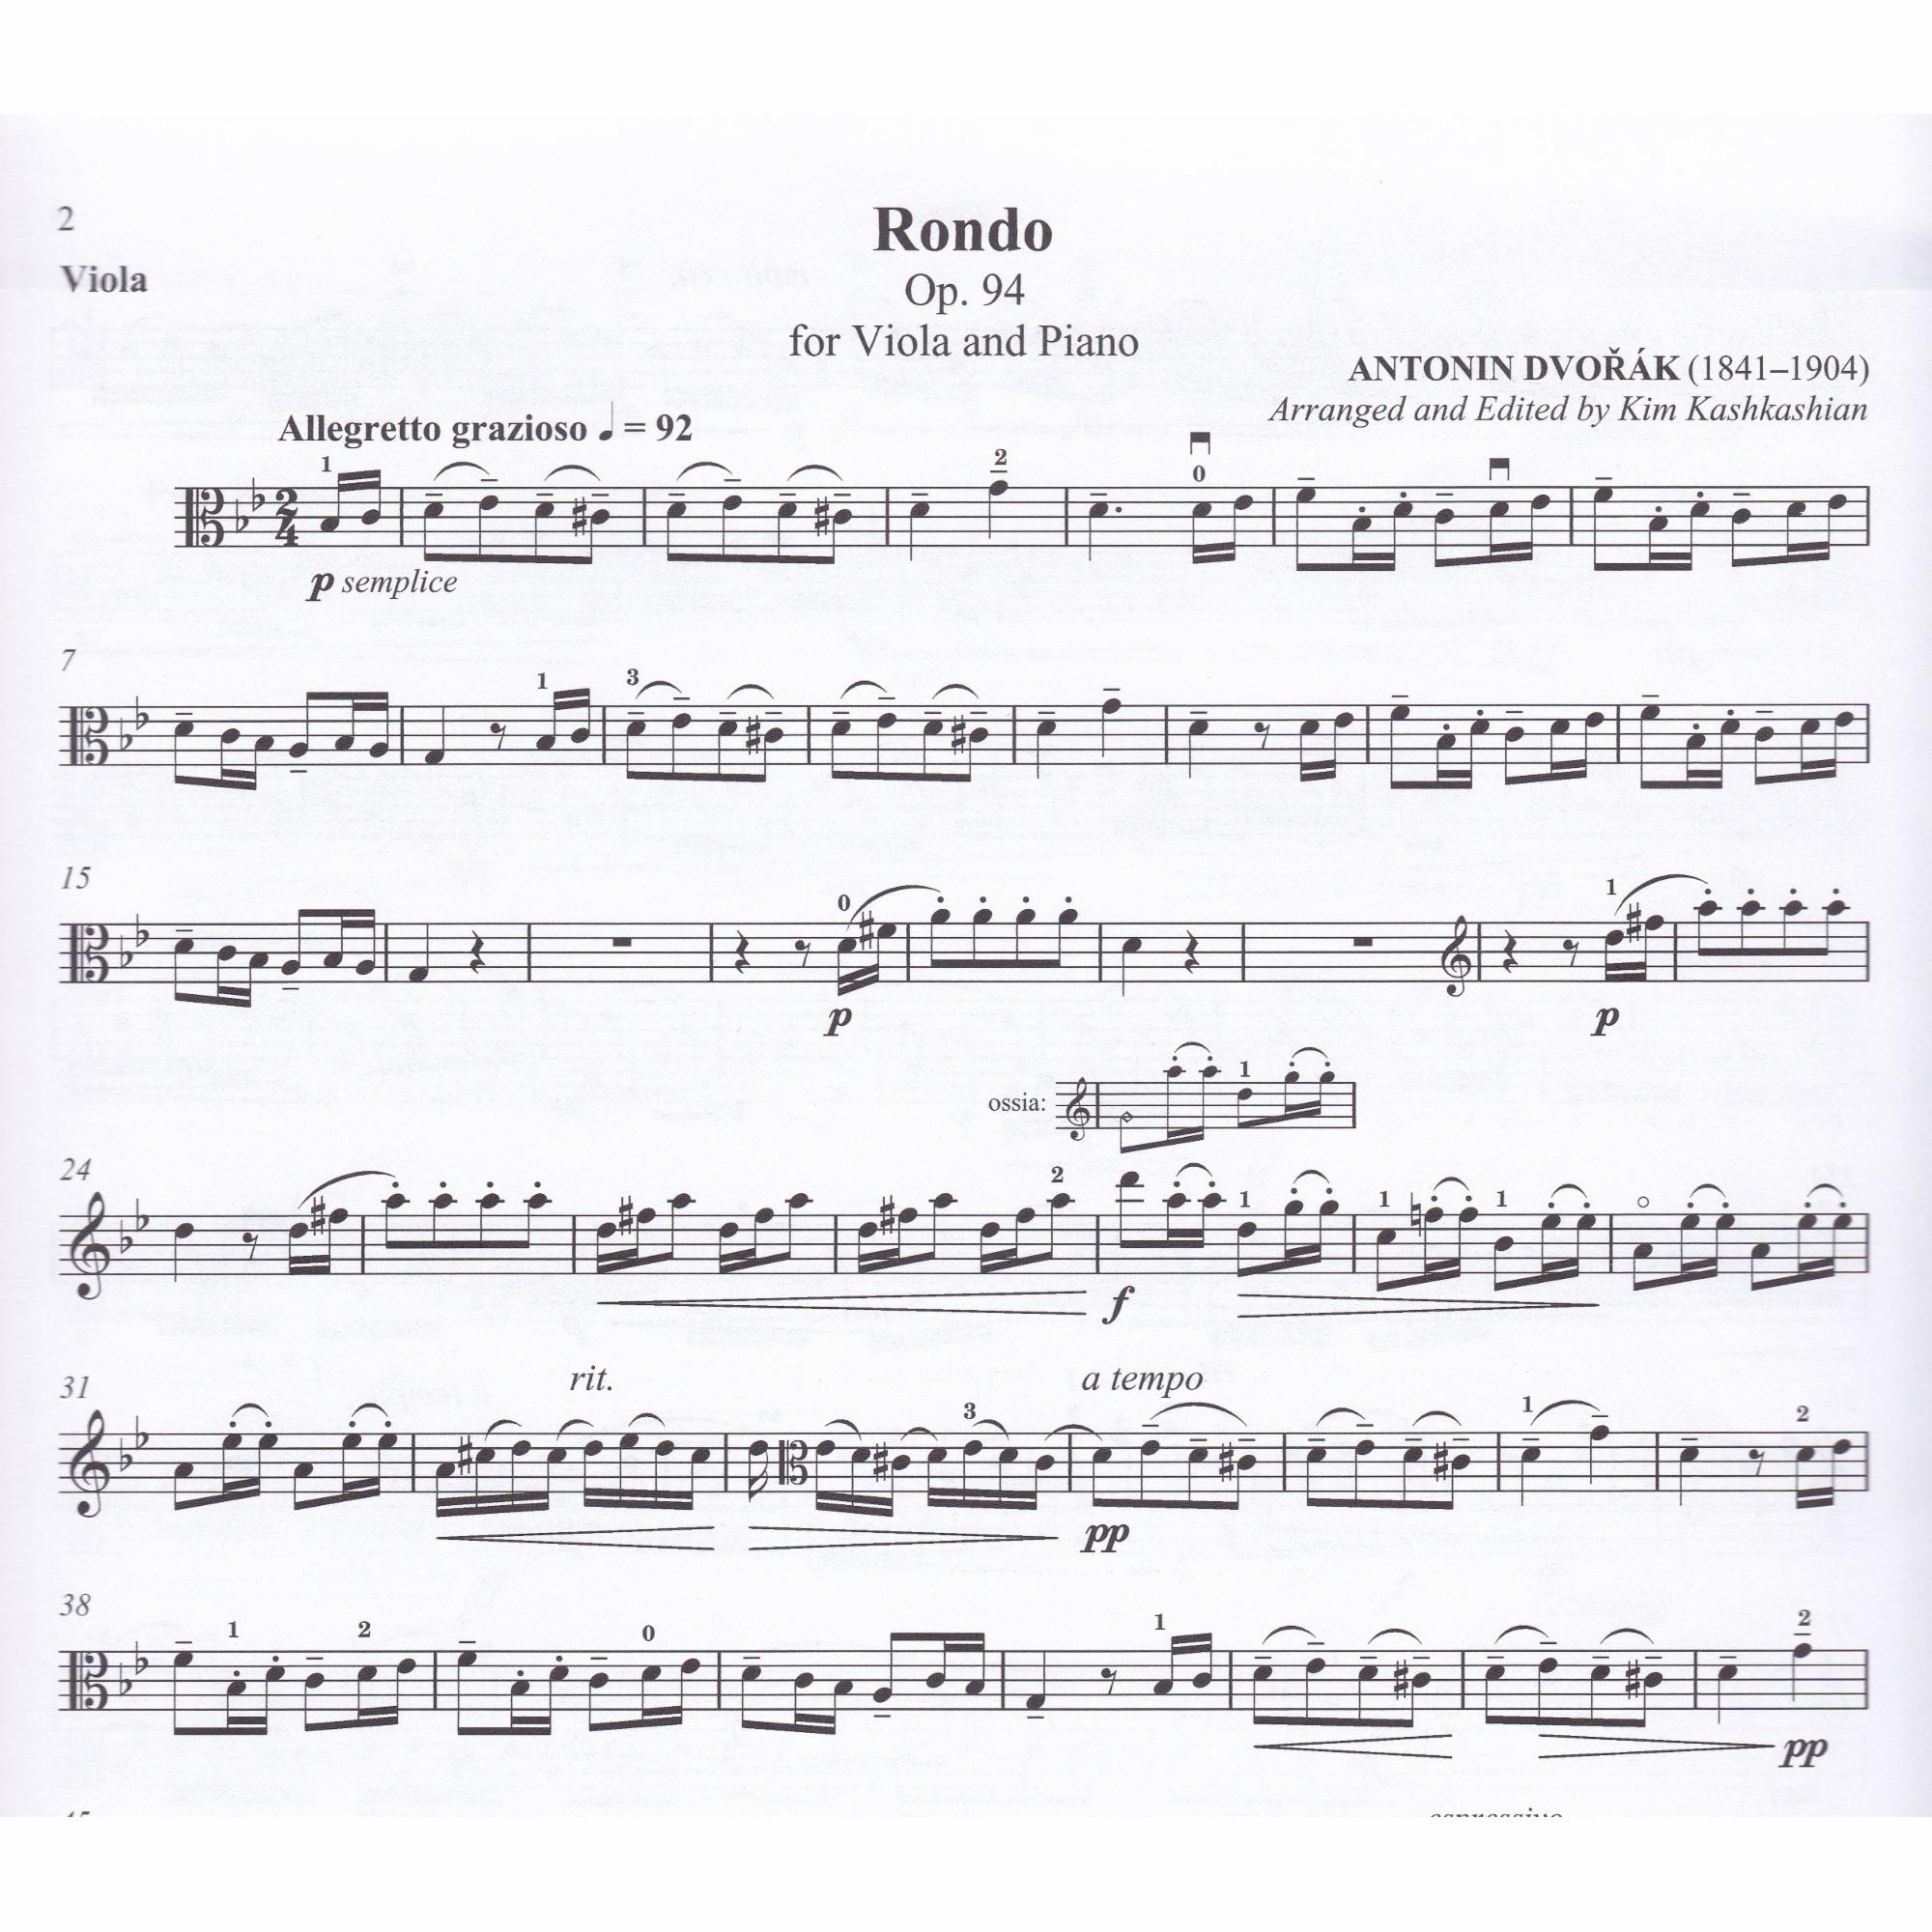 Rondo in G Minor for Viola and Piano, Op. 94